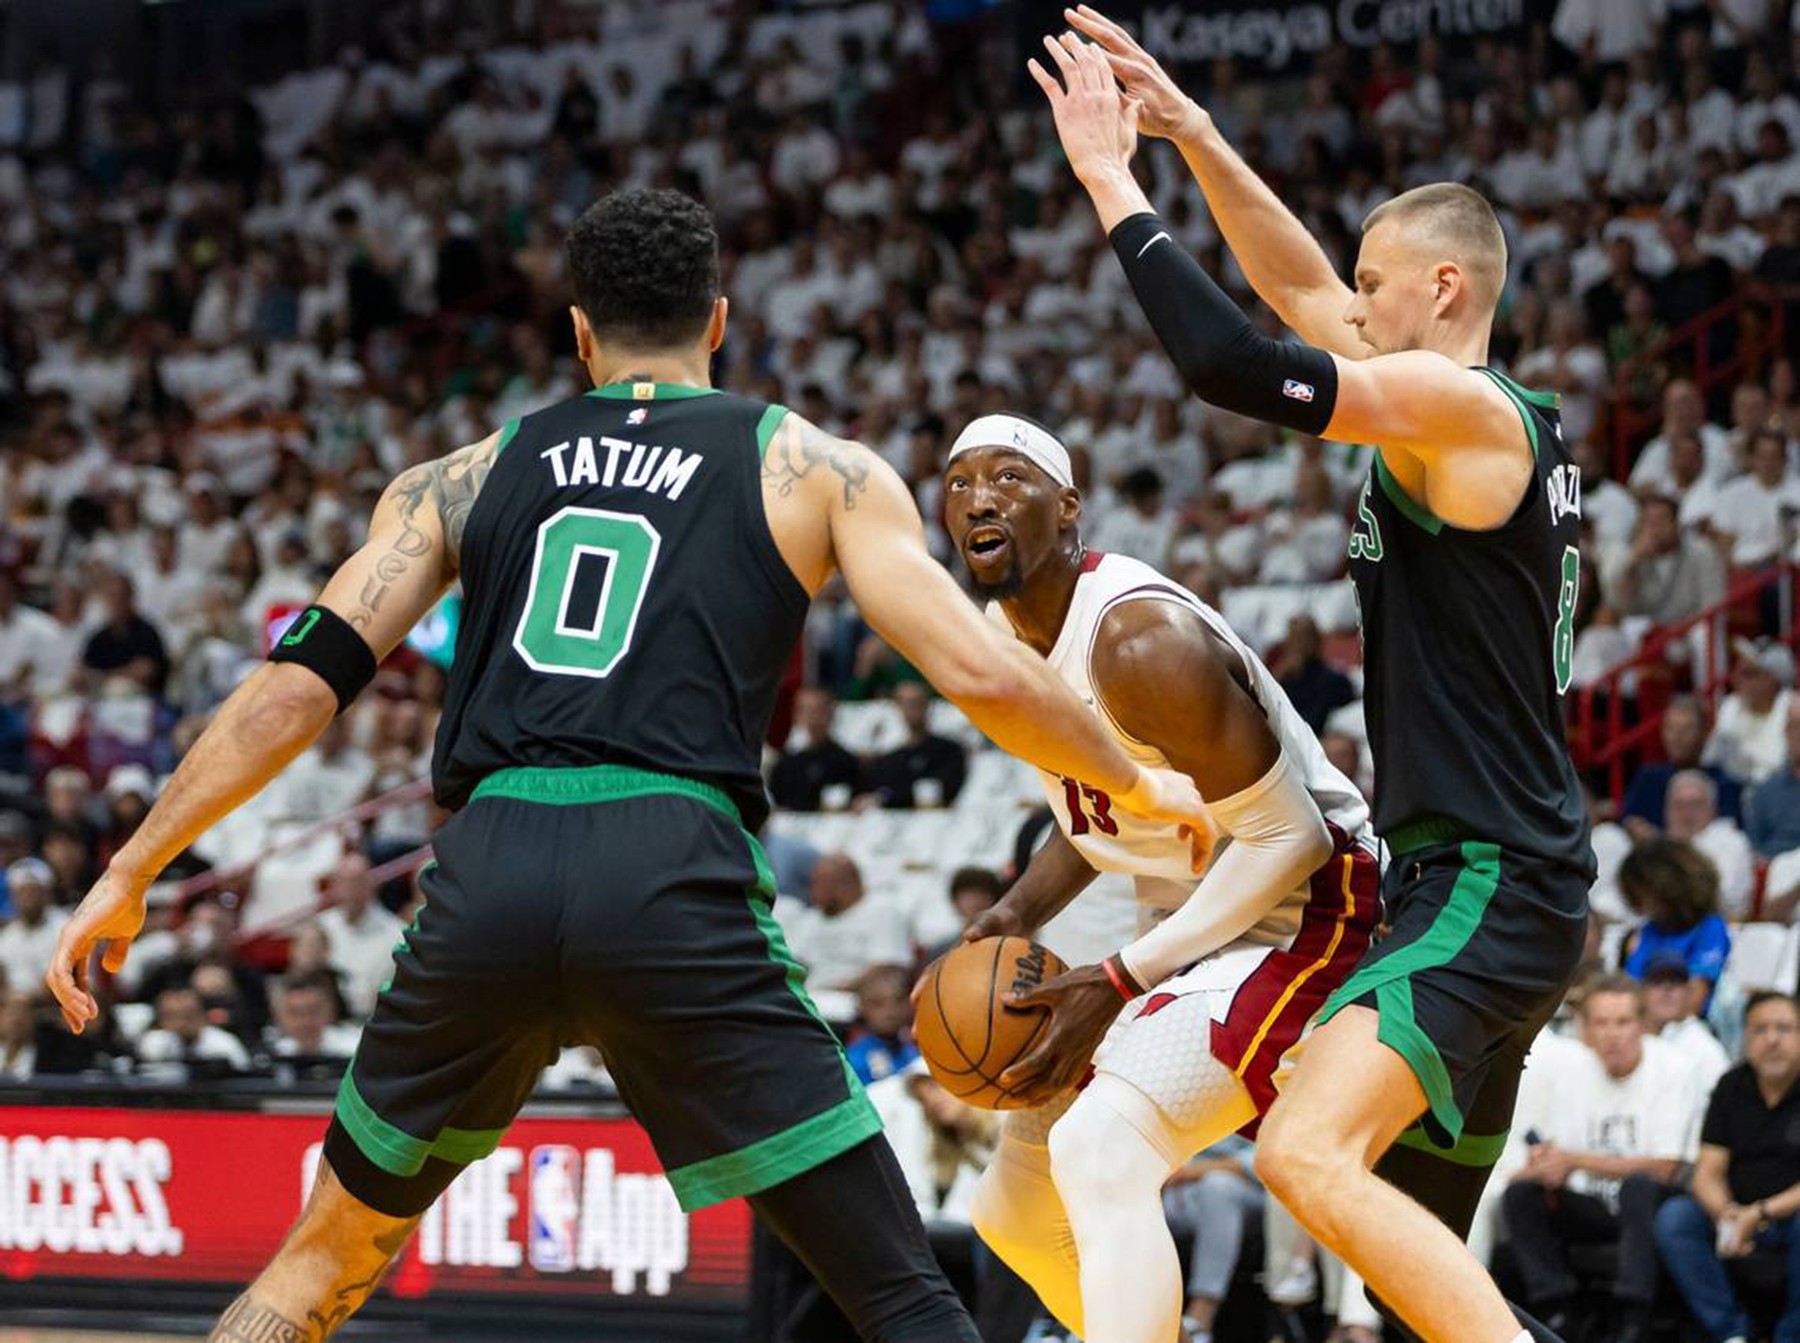 April 29, 2024: Miami Heat center Bam Adebayo (13) tries to score as Boston Celtics center Kristaps Porzingis (8) and forward Jayson Tatum (0) defend in the first half of Game 4 of an NBA basketball first-round playoff series at the Kaseya Center on Monday, April 29, 2024, in Miami.,Image: 869030540, License: Rights-managed, Restrictions: , Model Release: no, Credit line: Matias J. Ocner / Zuma Press / Profimedia